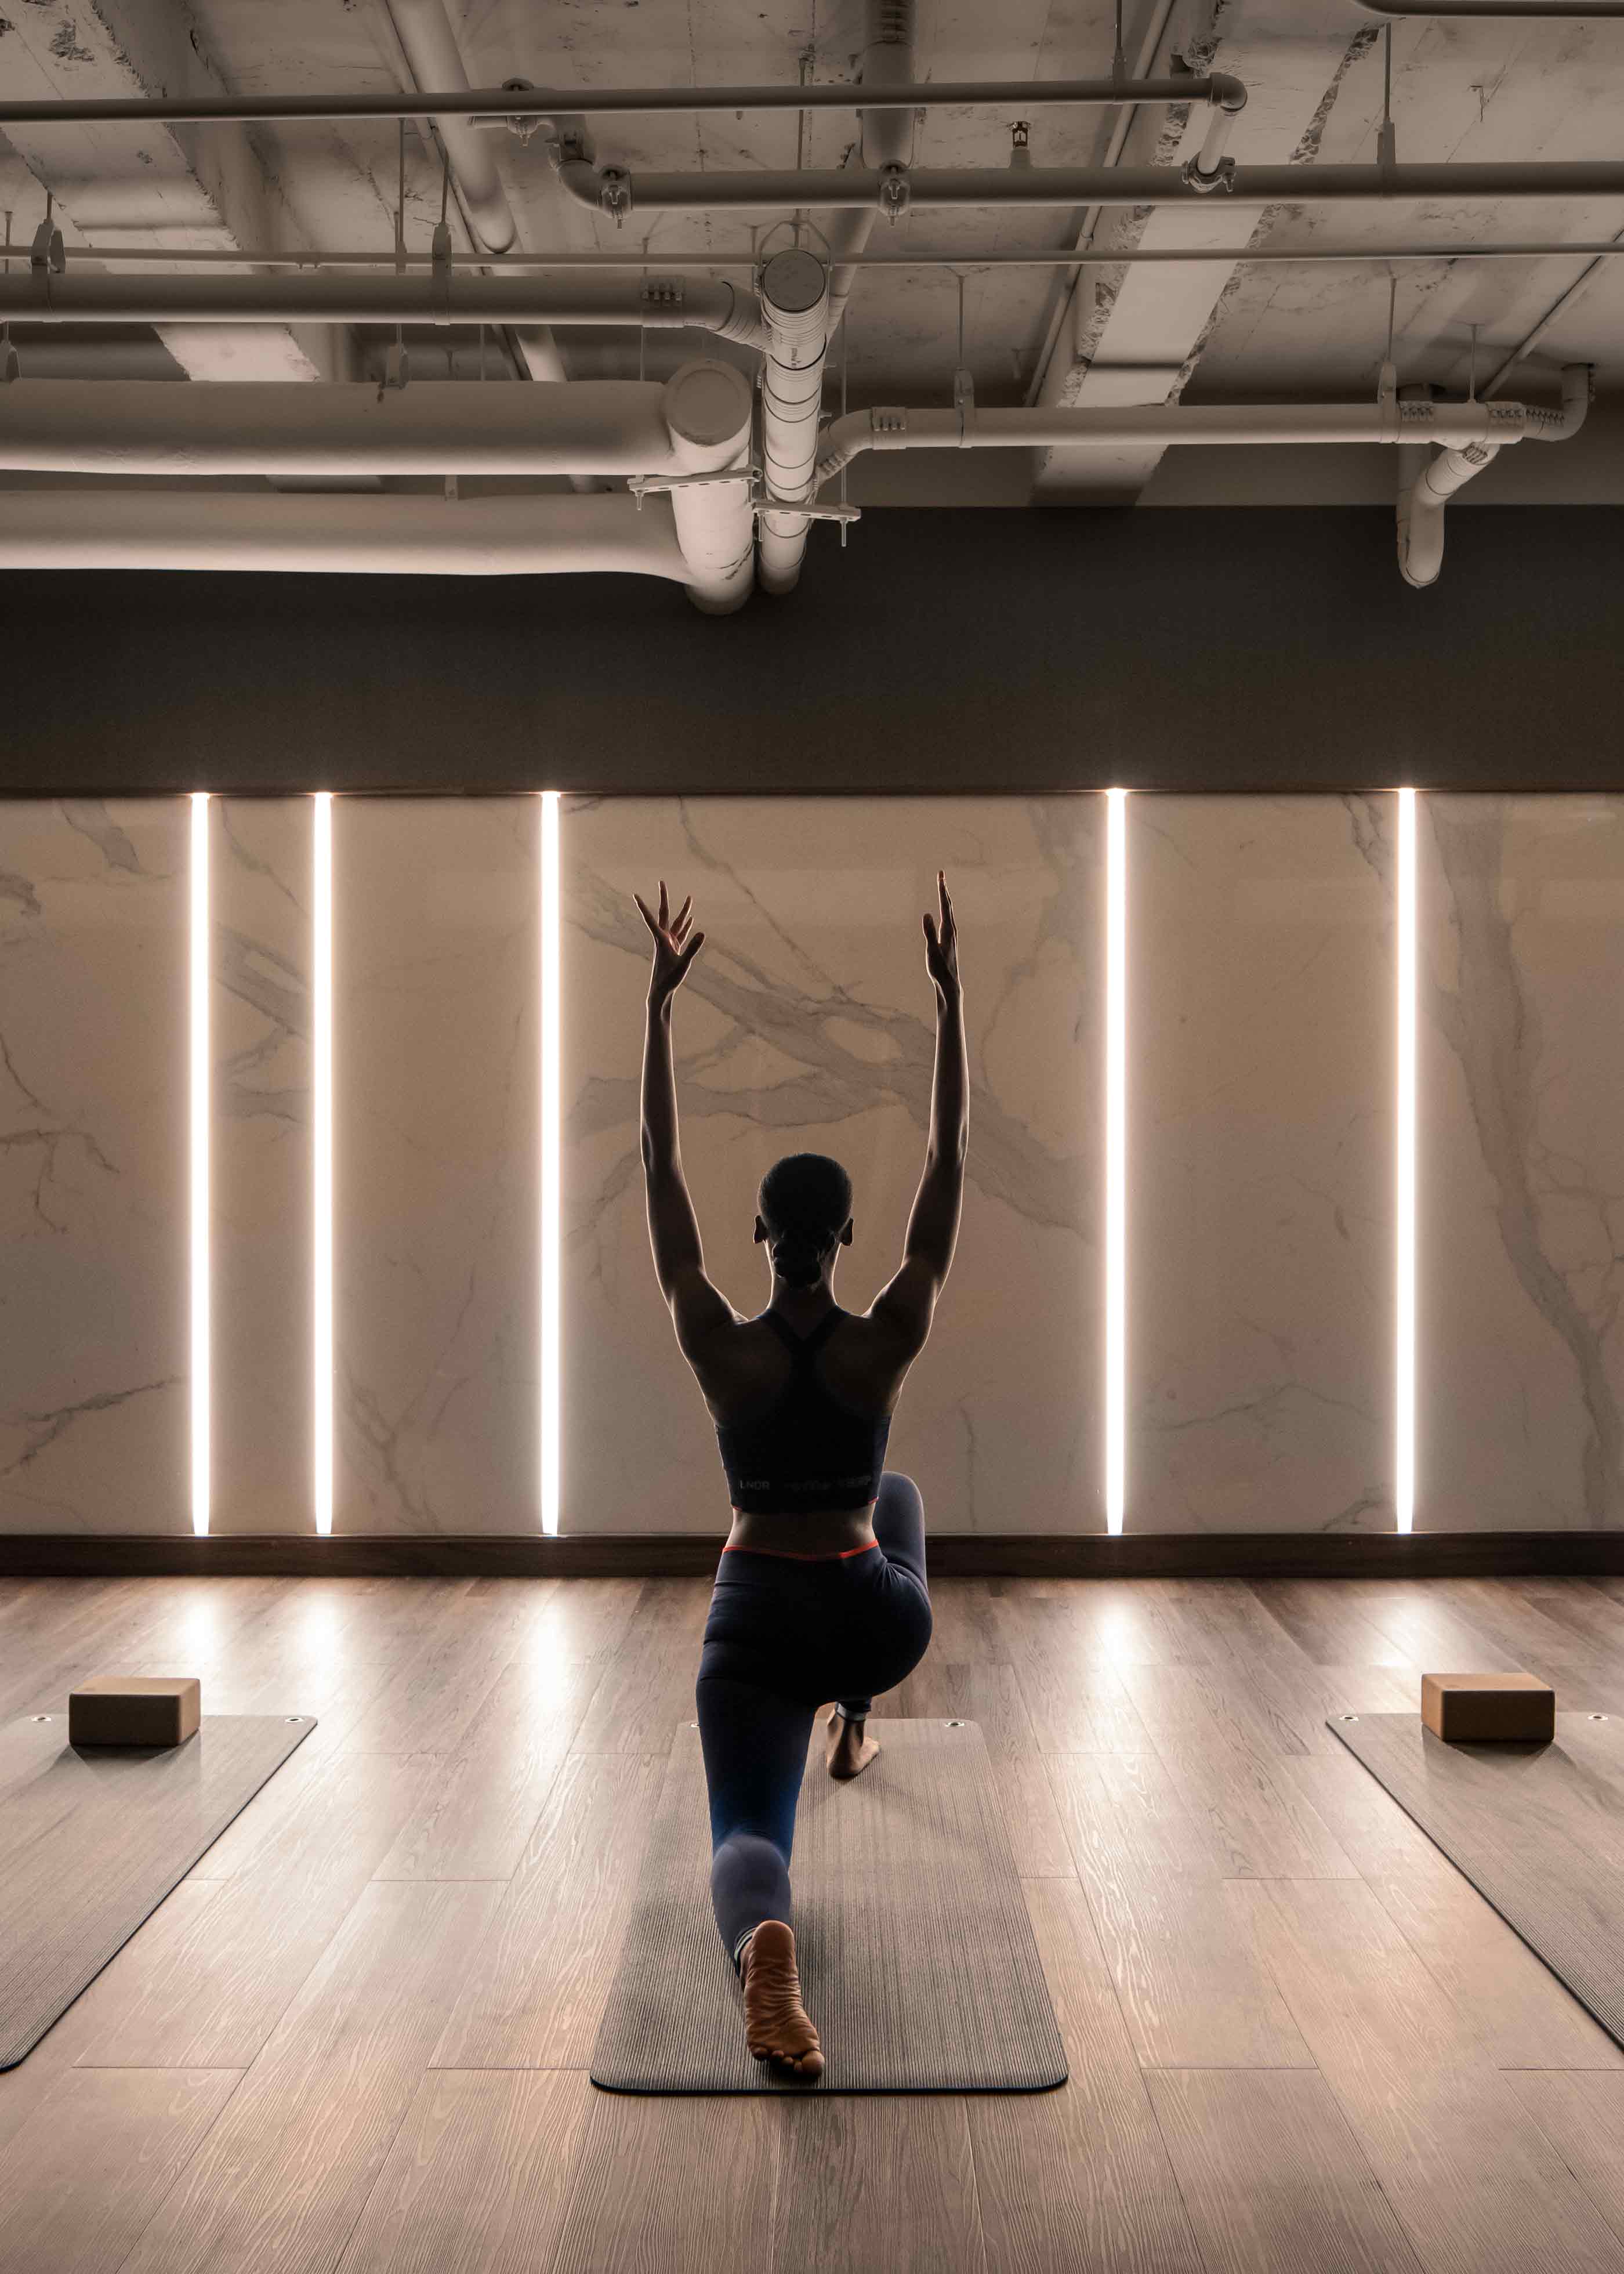 a woman practices a yoga move in a dimly lit room